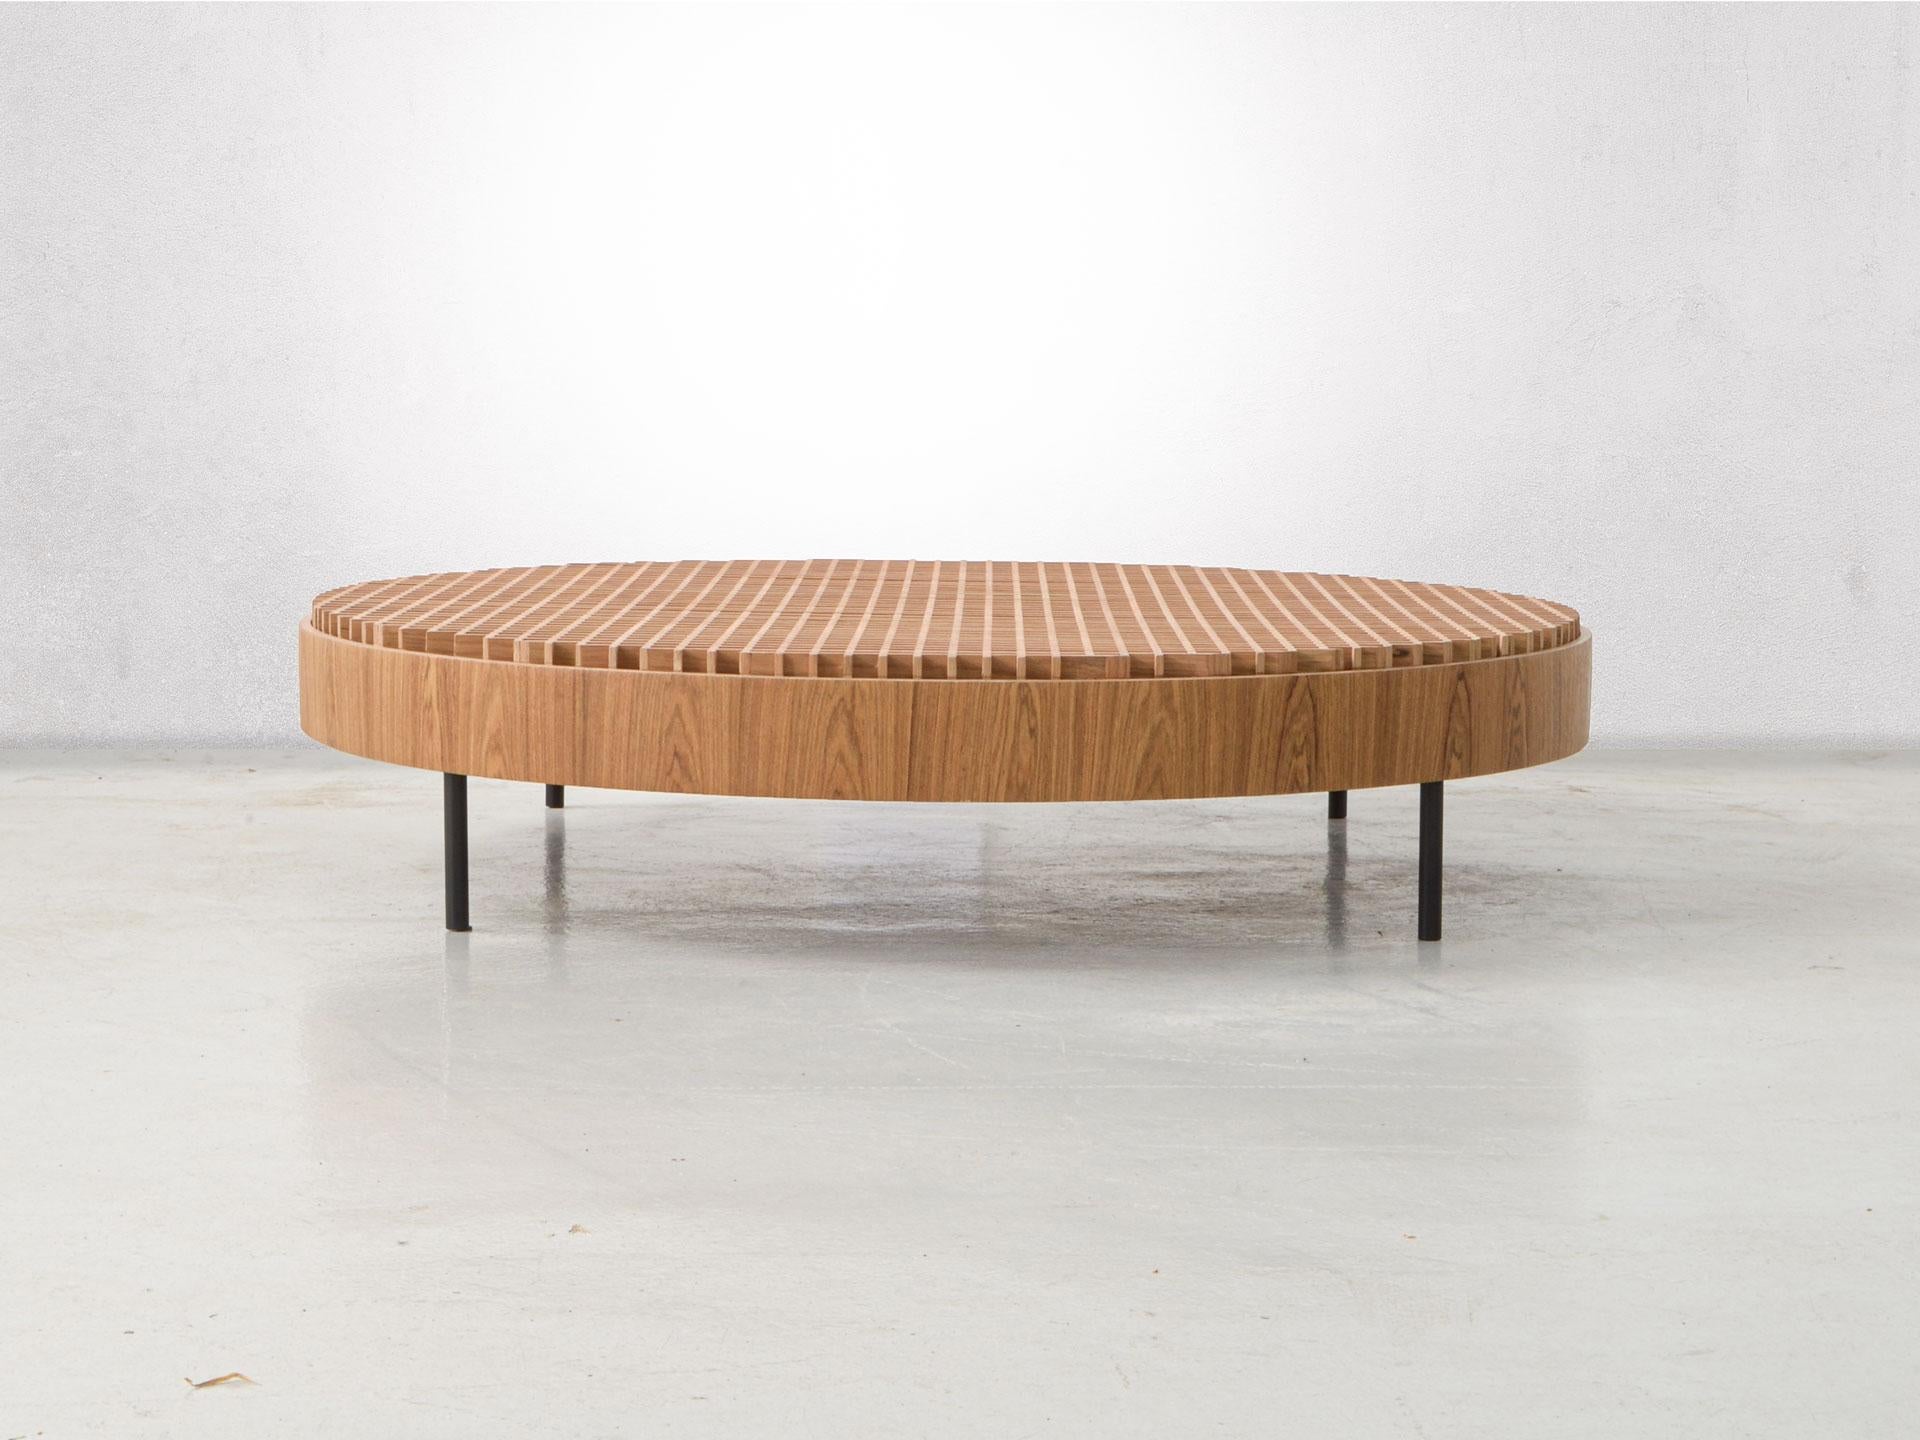 The beautiful Mineira coffee table was designed by Ronald Sasson in 2020. 
The simple lines from the minimalistic design combined with the thoughtful details of the woodwork on the top give a lot of character to this outstanding piece. 

The